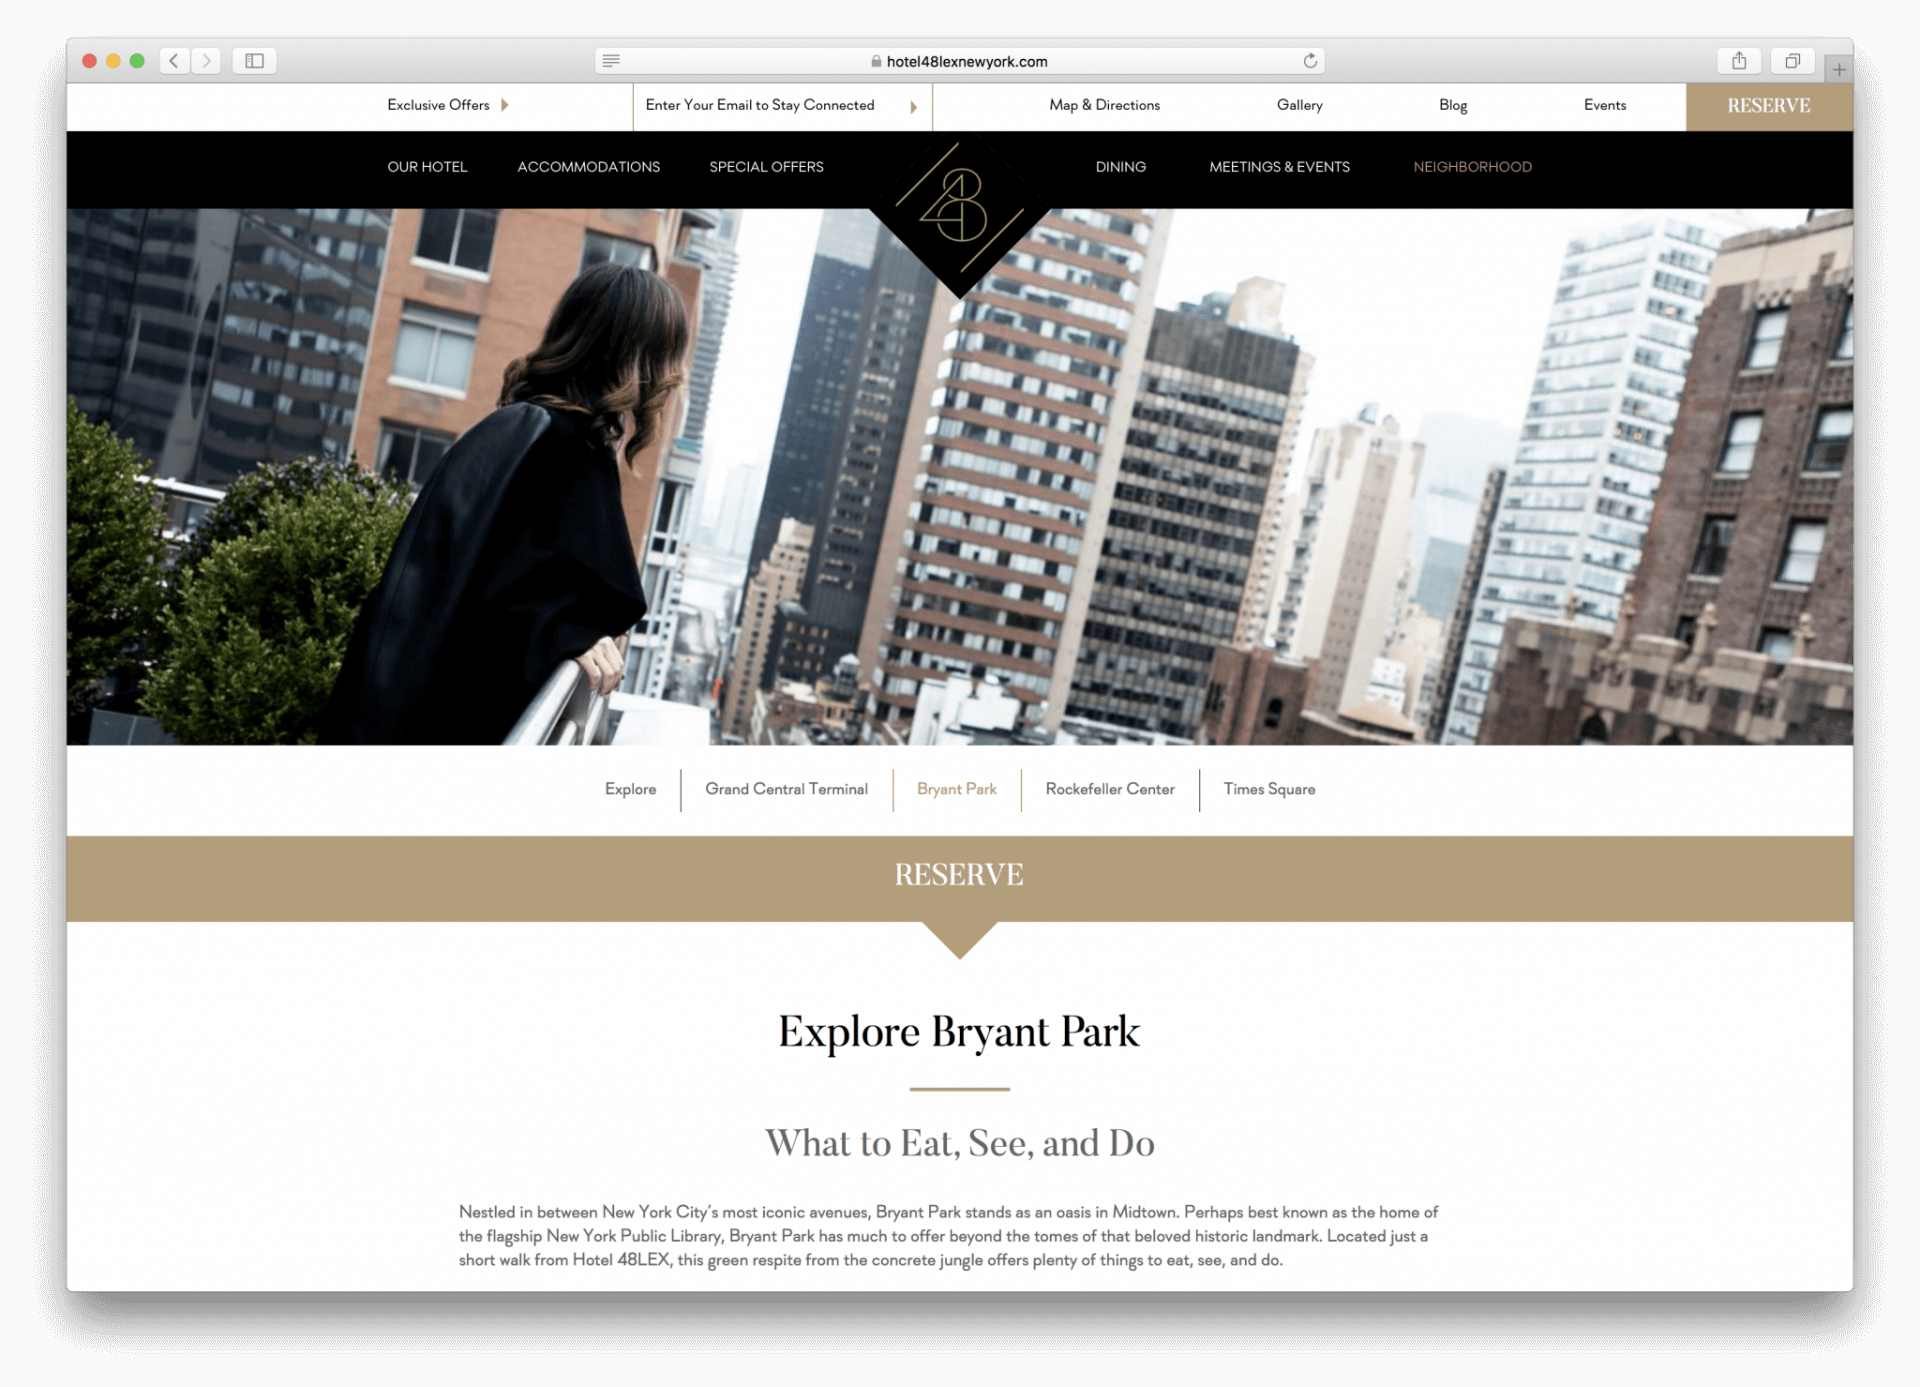 Online Welcome Page of The 48LEX Hotels